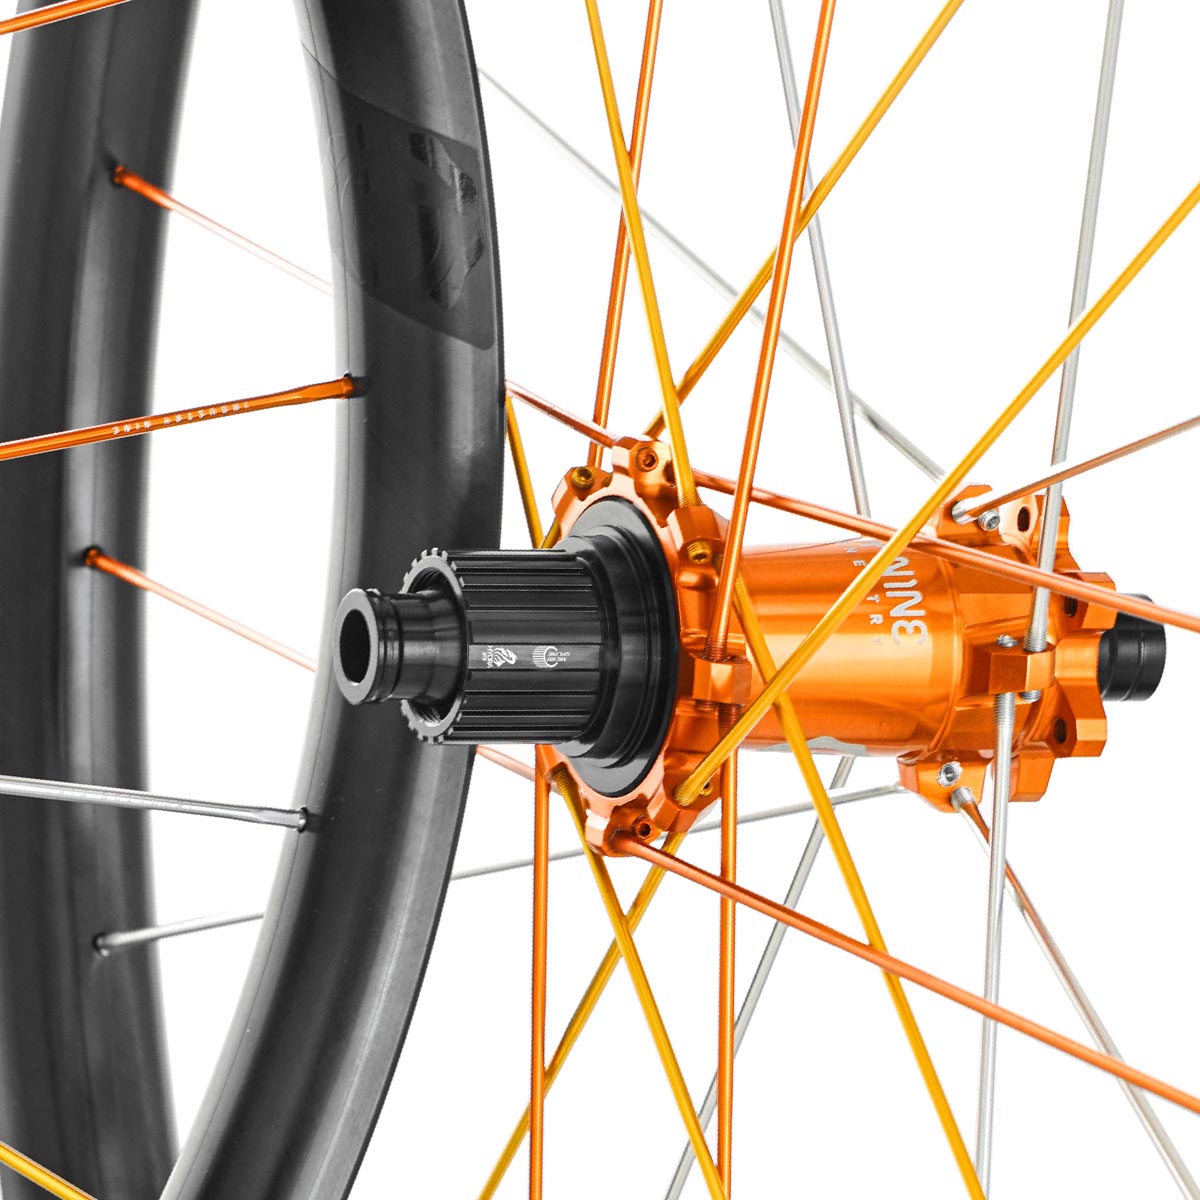 Industry Nine reshapes carbon MTB line w/ new rims from We Are One Composites